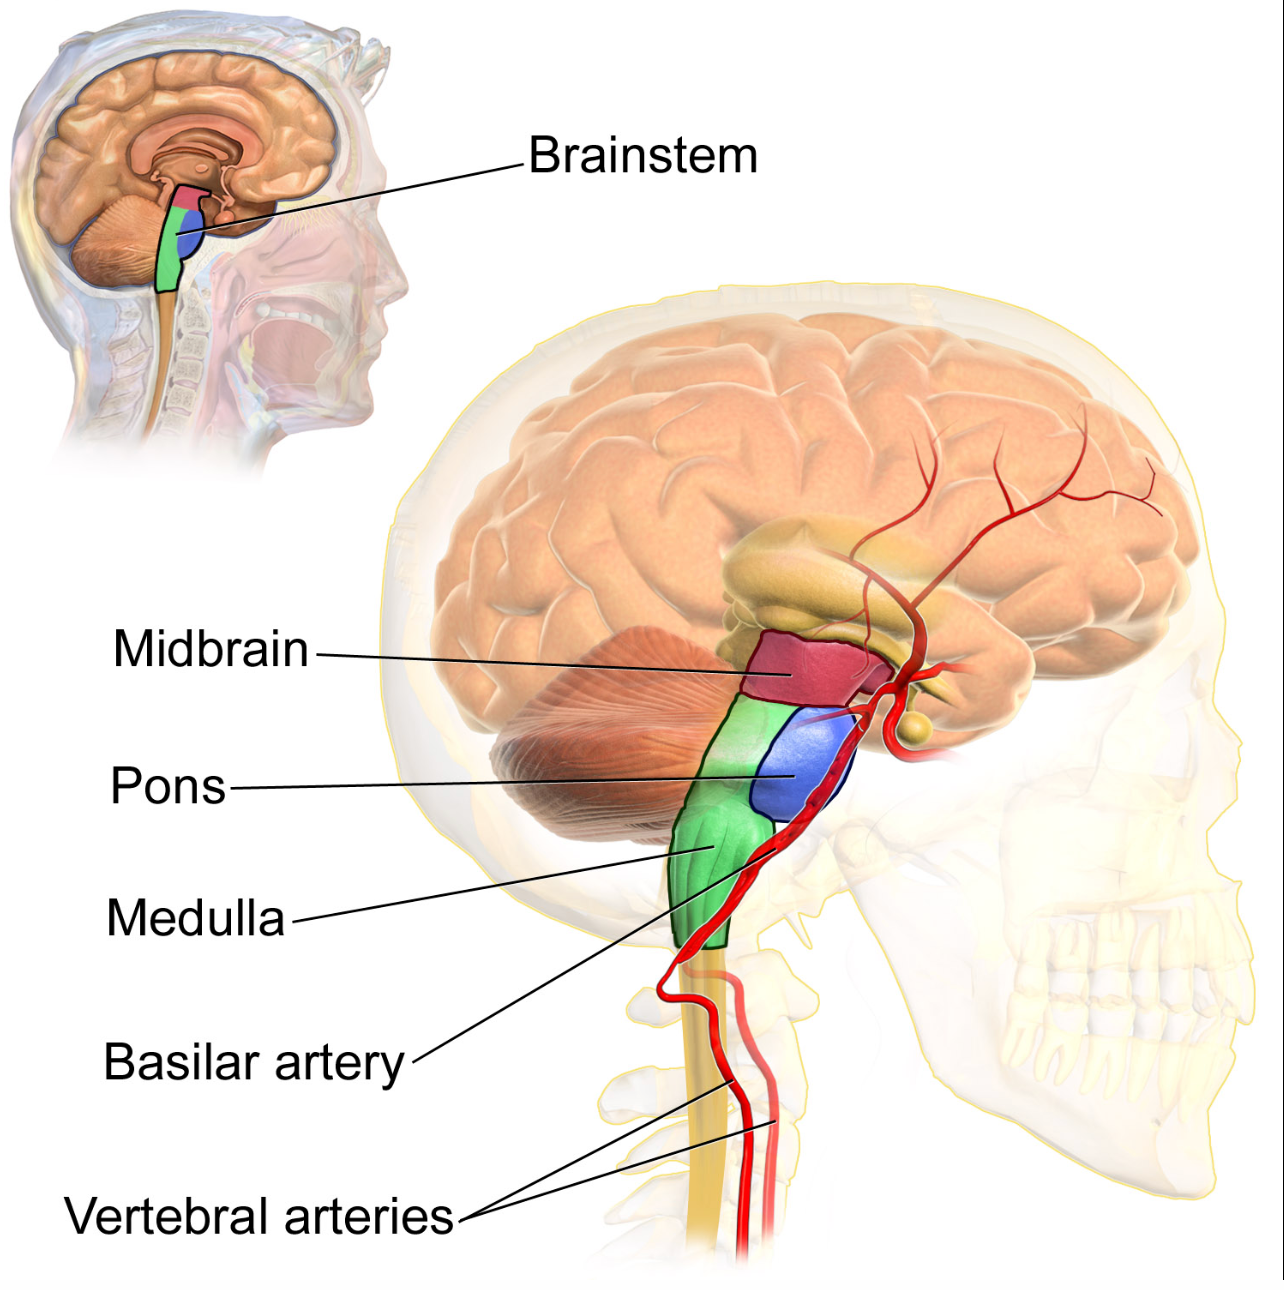 Image of the brainstem labeled